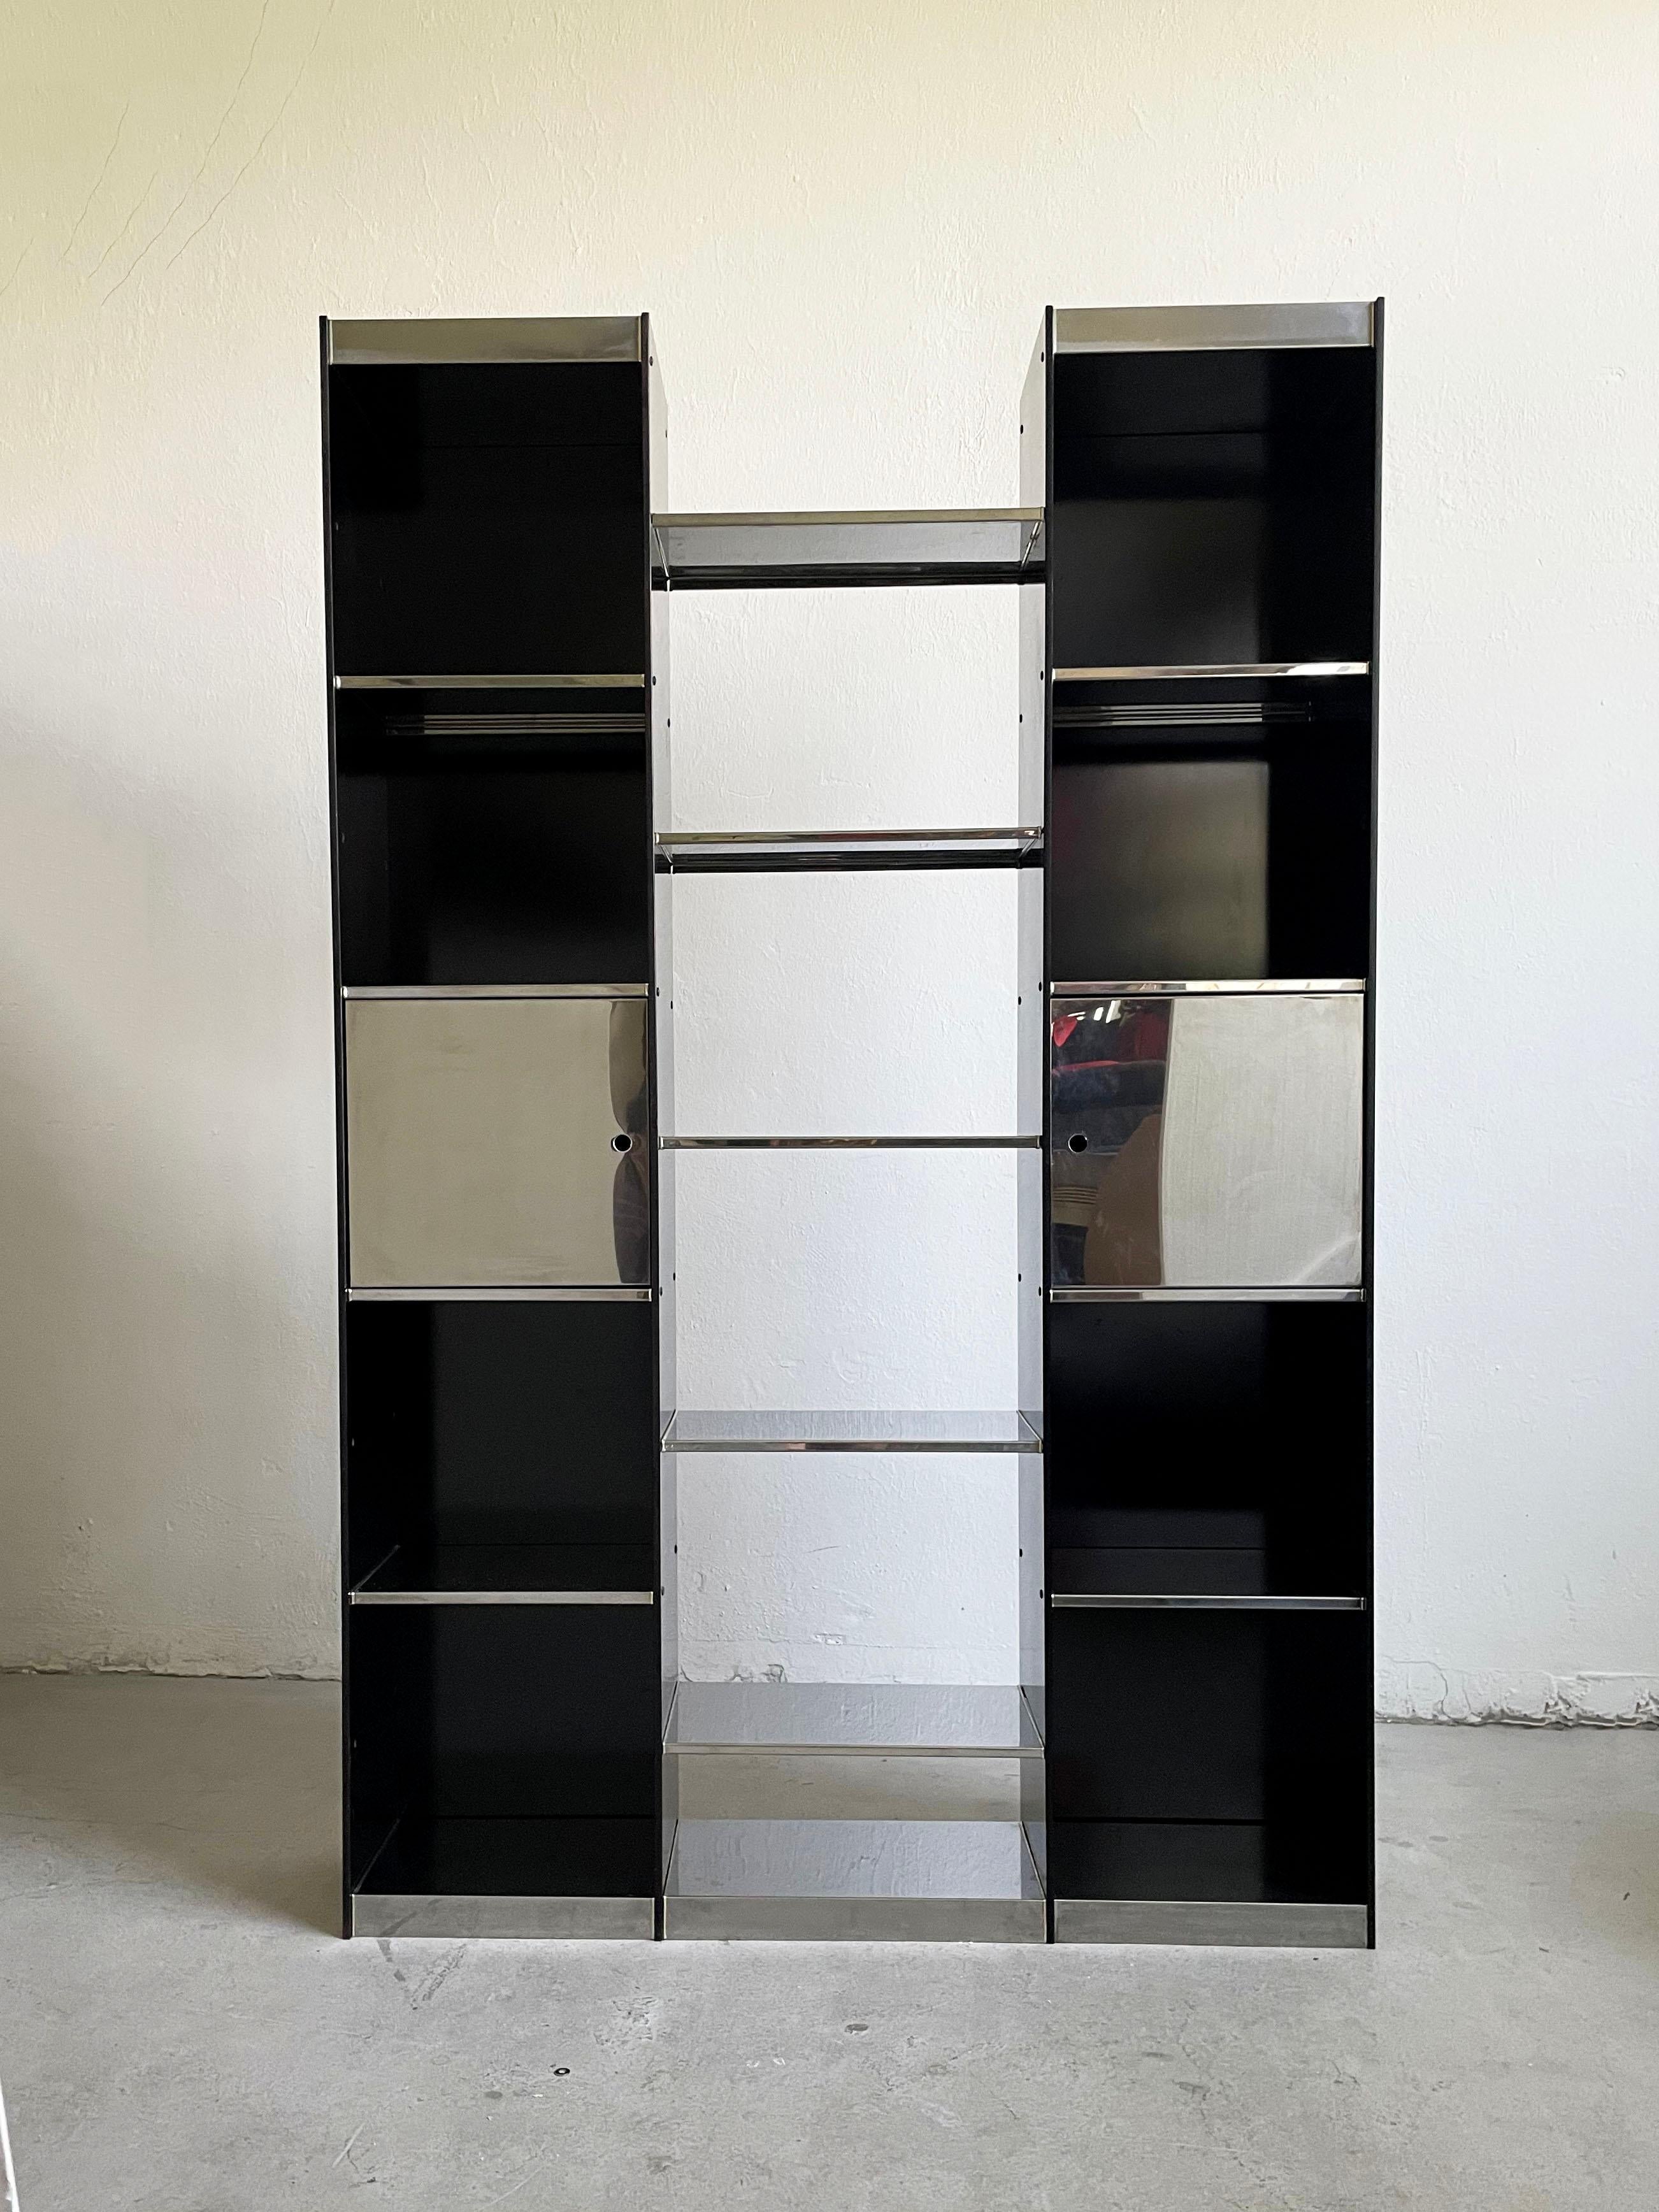 This bookcase library was designed by Willy Rizzo and manufactured by Italian high-end furniture manufacturer Cidue in the 1970's.

It has a manufacturer's stamp 

It was very shortly in productions and it's a rare piece.

The main characteristics